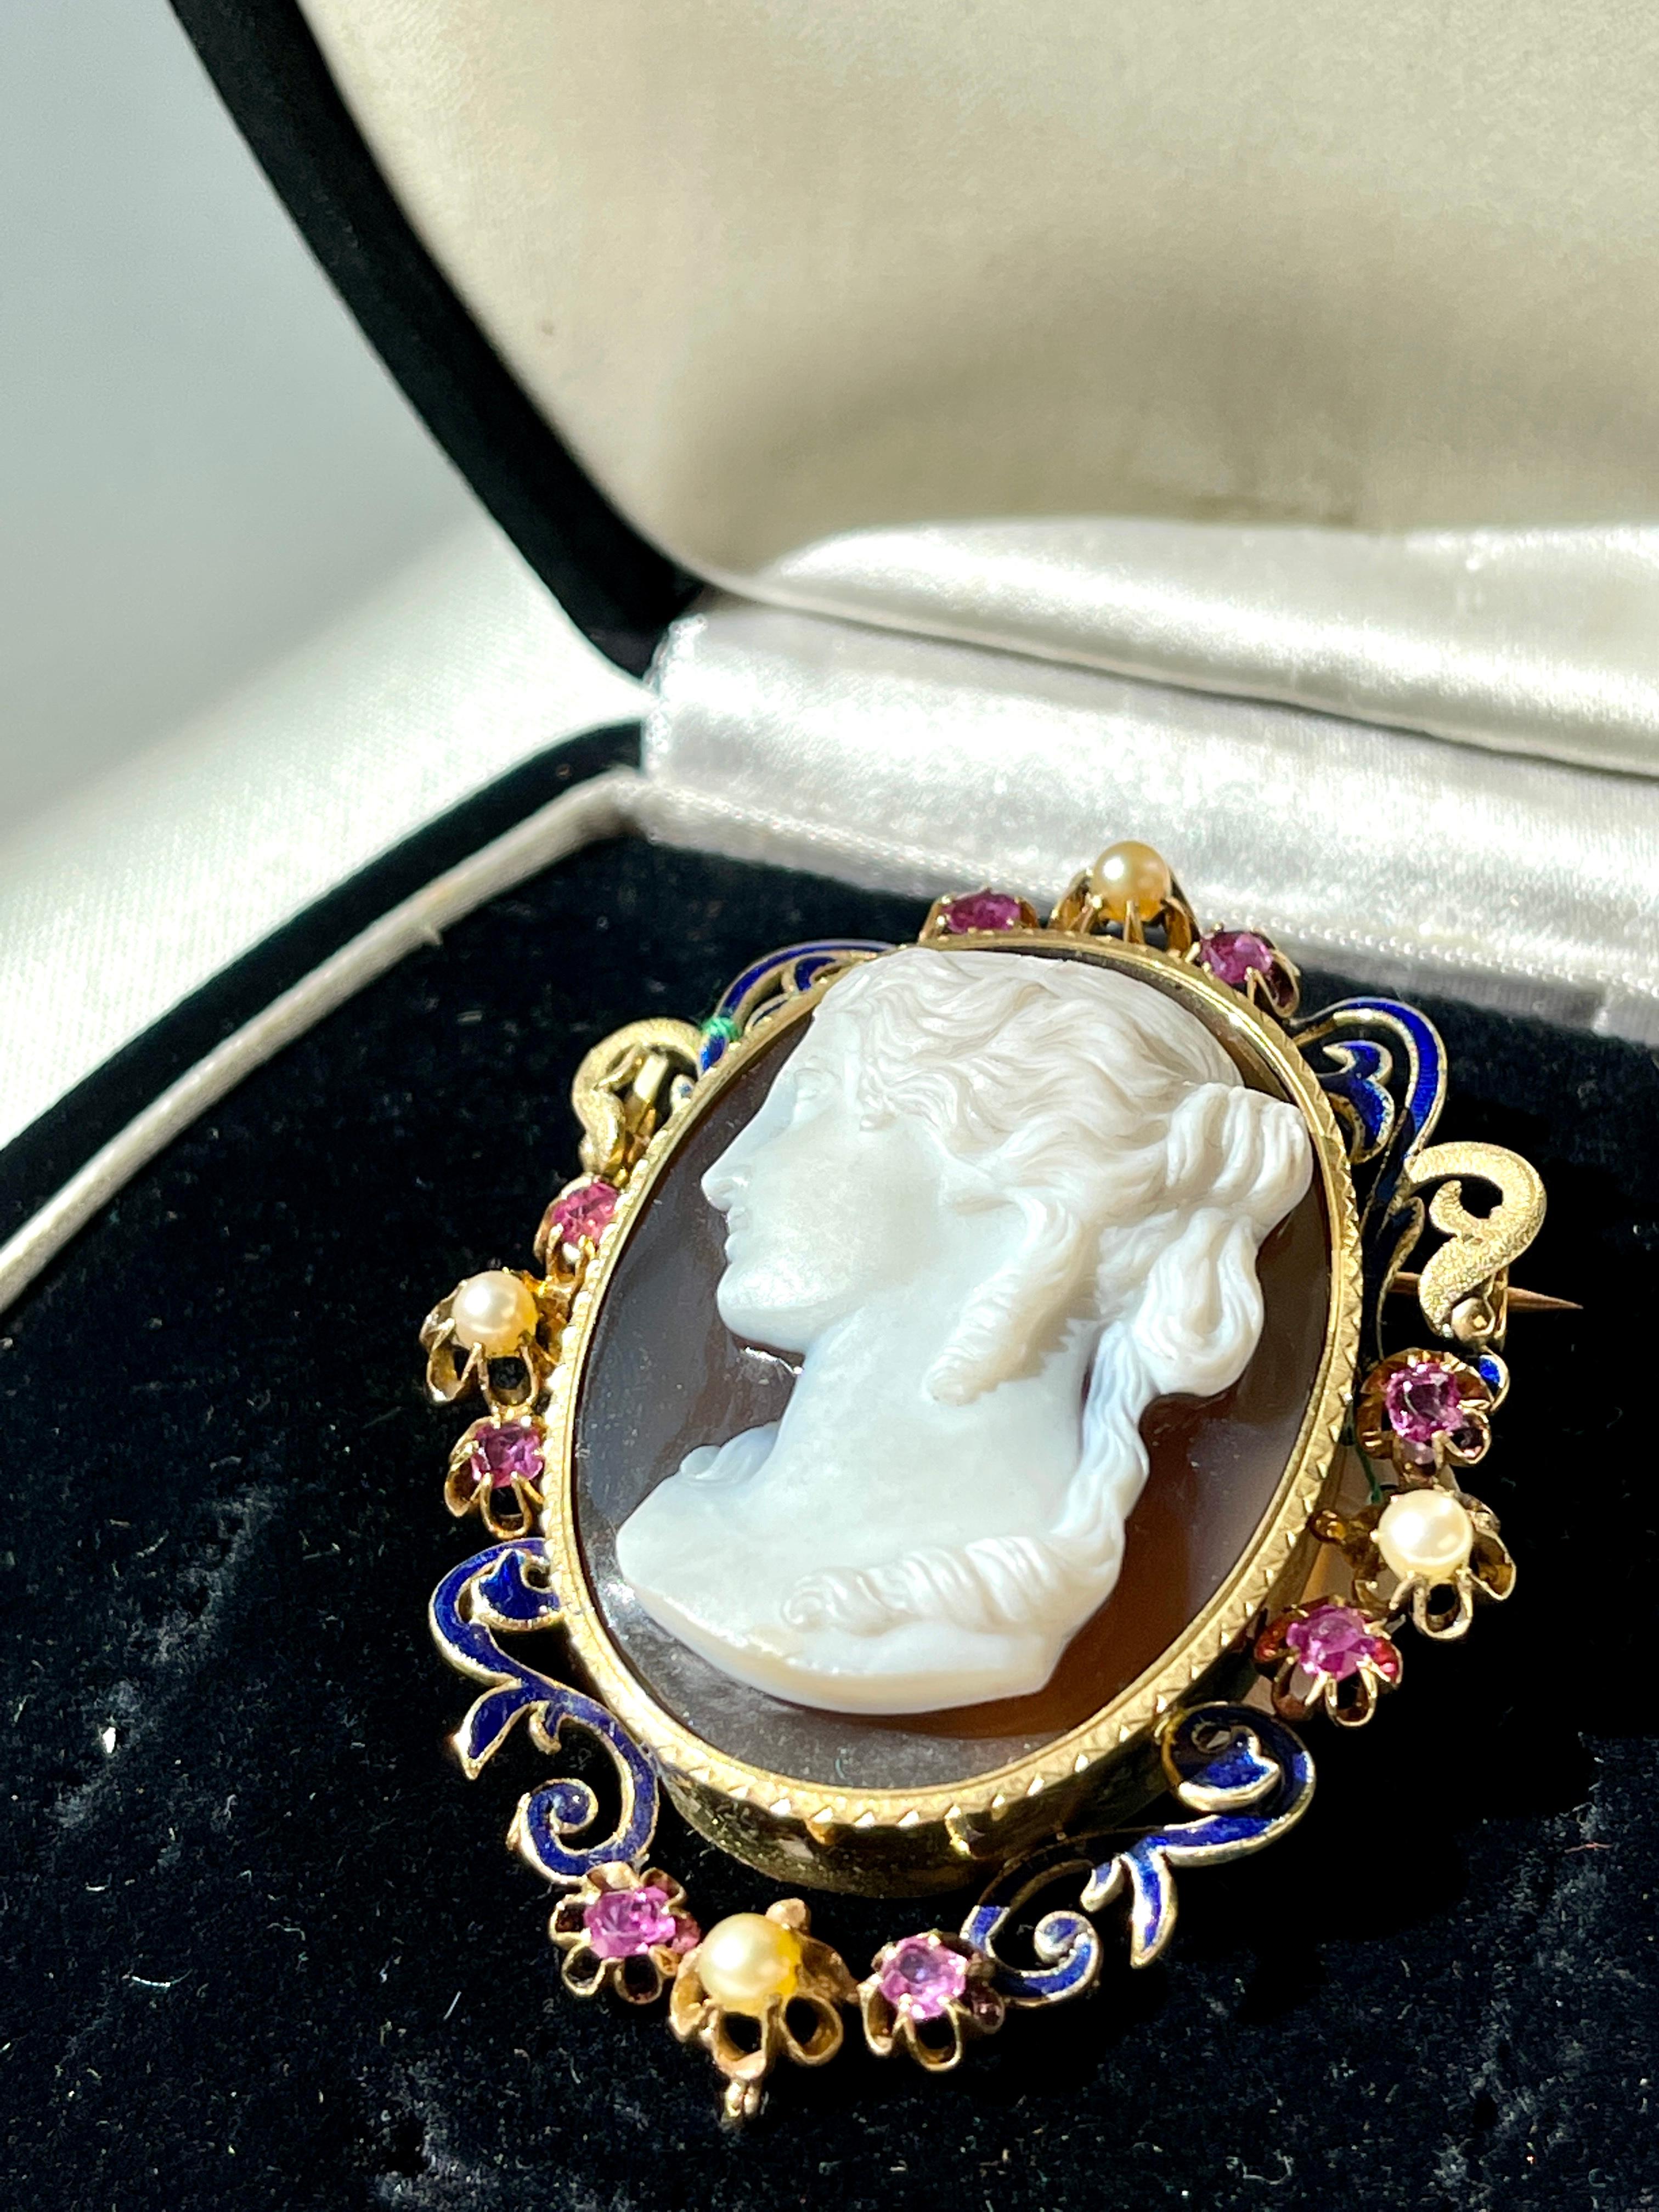 A Magnificent French Art Nouveau Cameo Brooch with a spectacular Agata Cameo depicting the side profile of a beautiful lady with ringlets and an impressive gold frame work. 

The detail across the cameo is breath taking and hand carved by a true